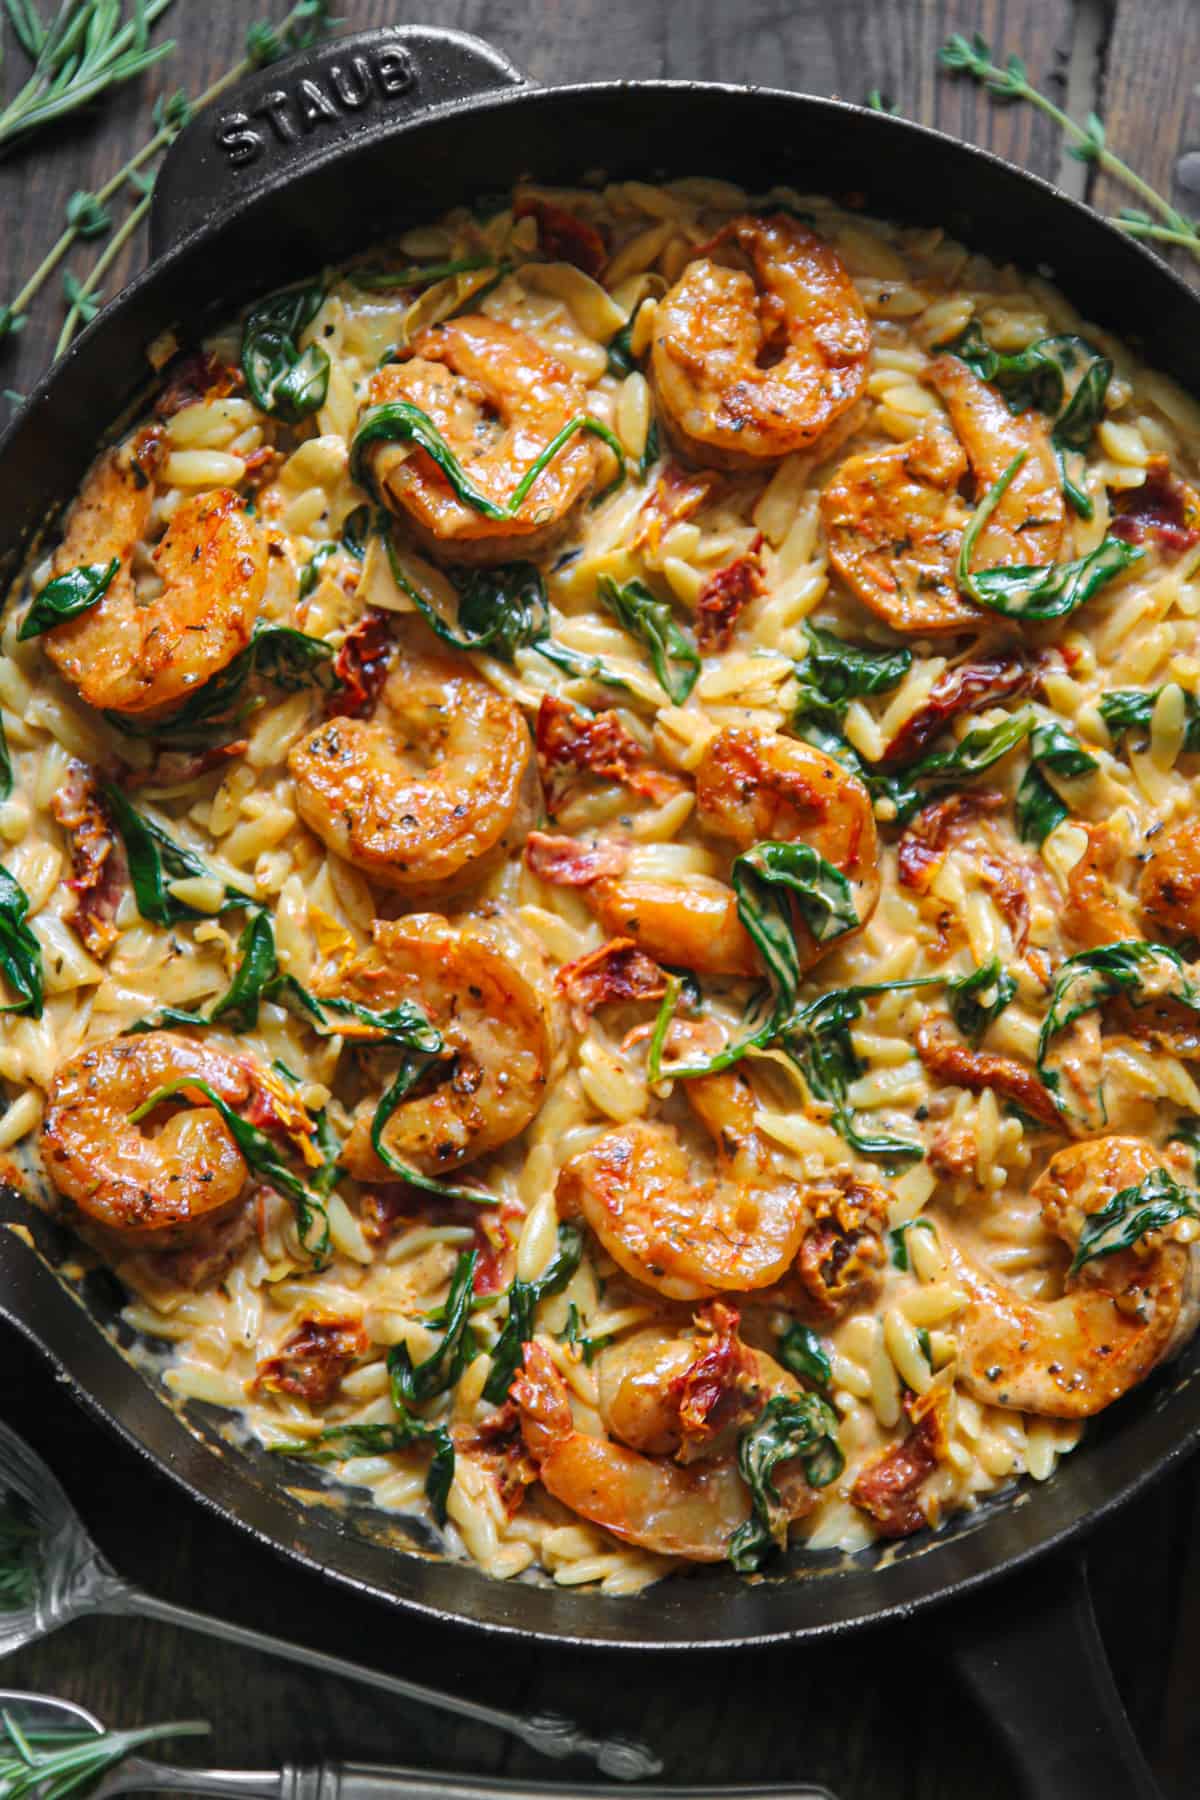 Creamy Shrimp Orzo with Spinach, Sun-Dried Tomatoes, and Artichokes - in a cast iron skillet.